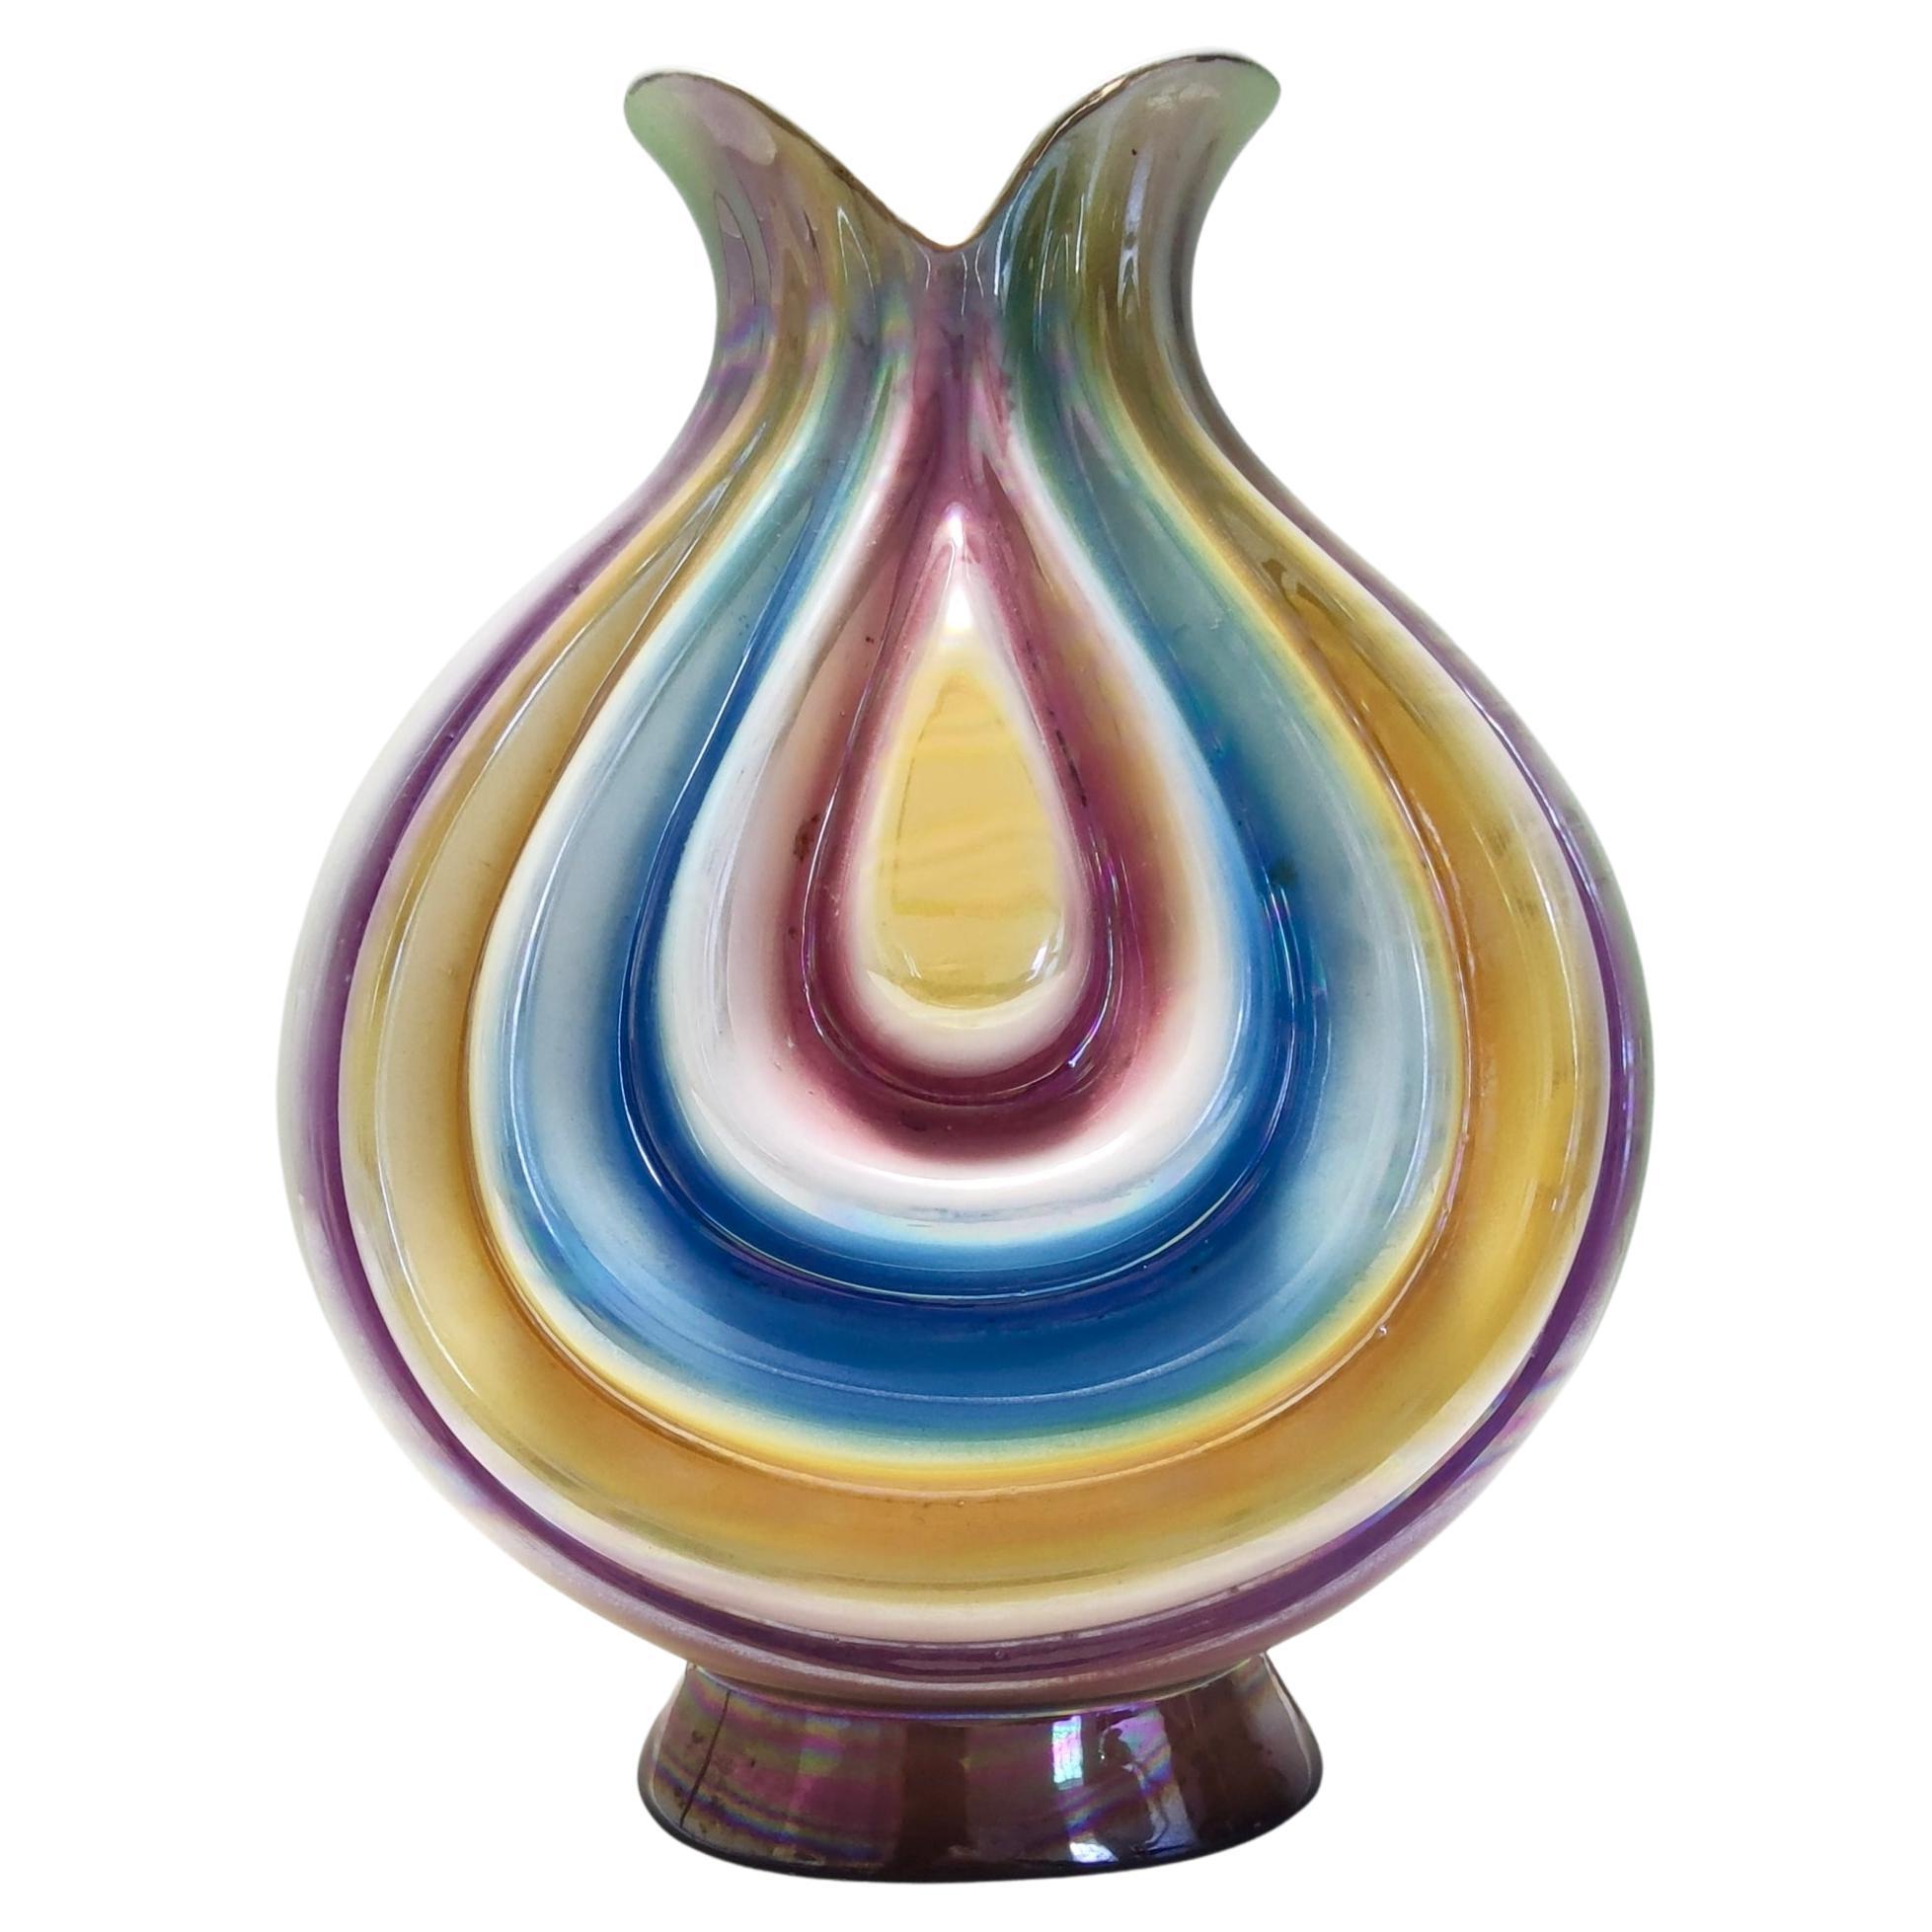 Vintage Ceramic Vase Attributed to Italo Casini with Iridescent Colors, Italy